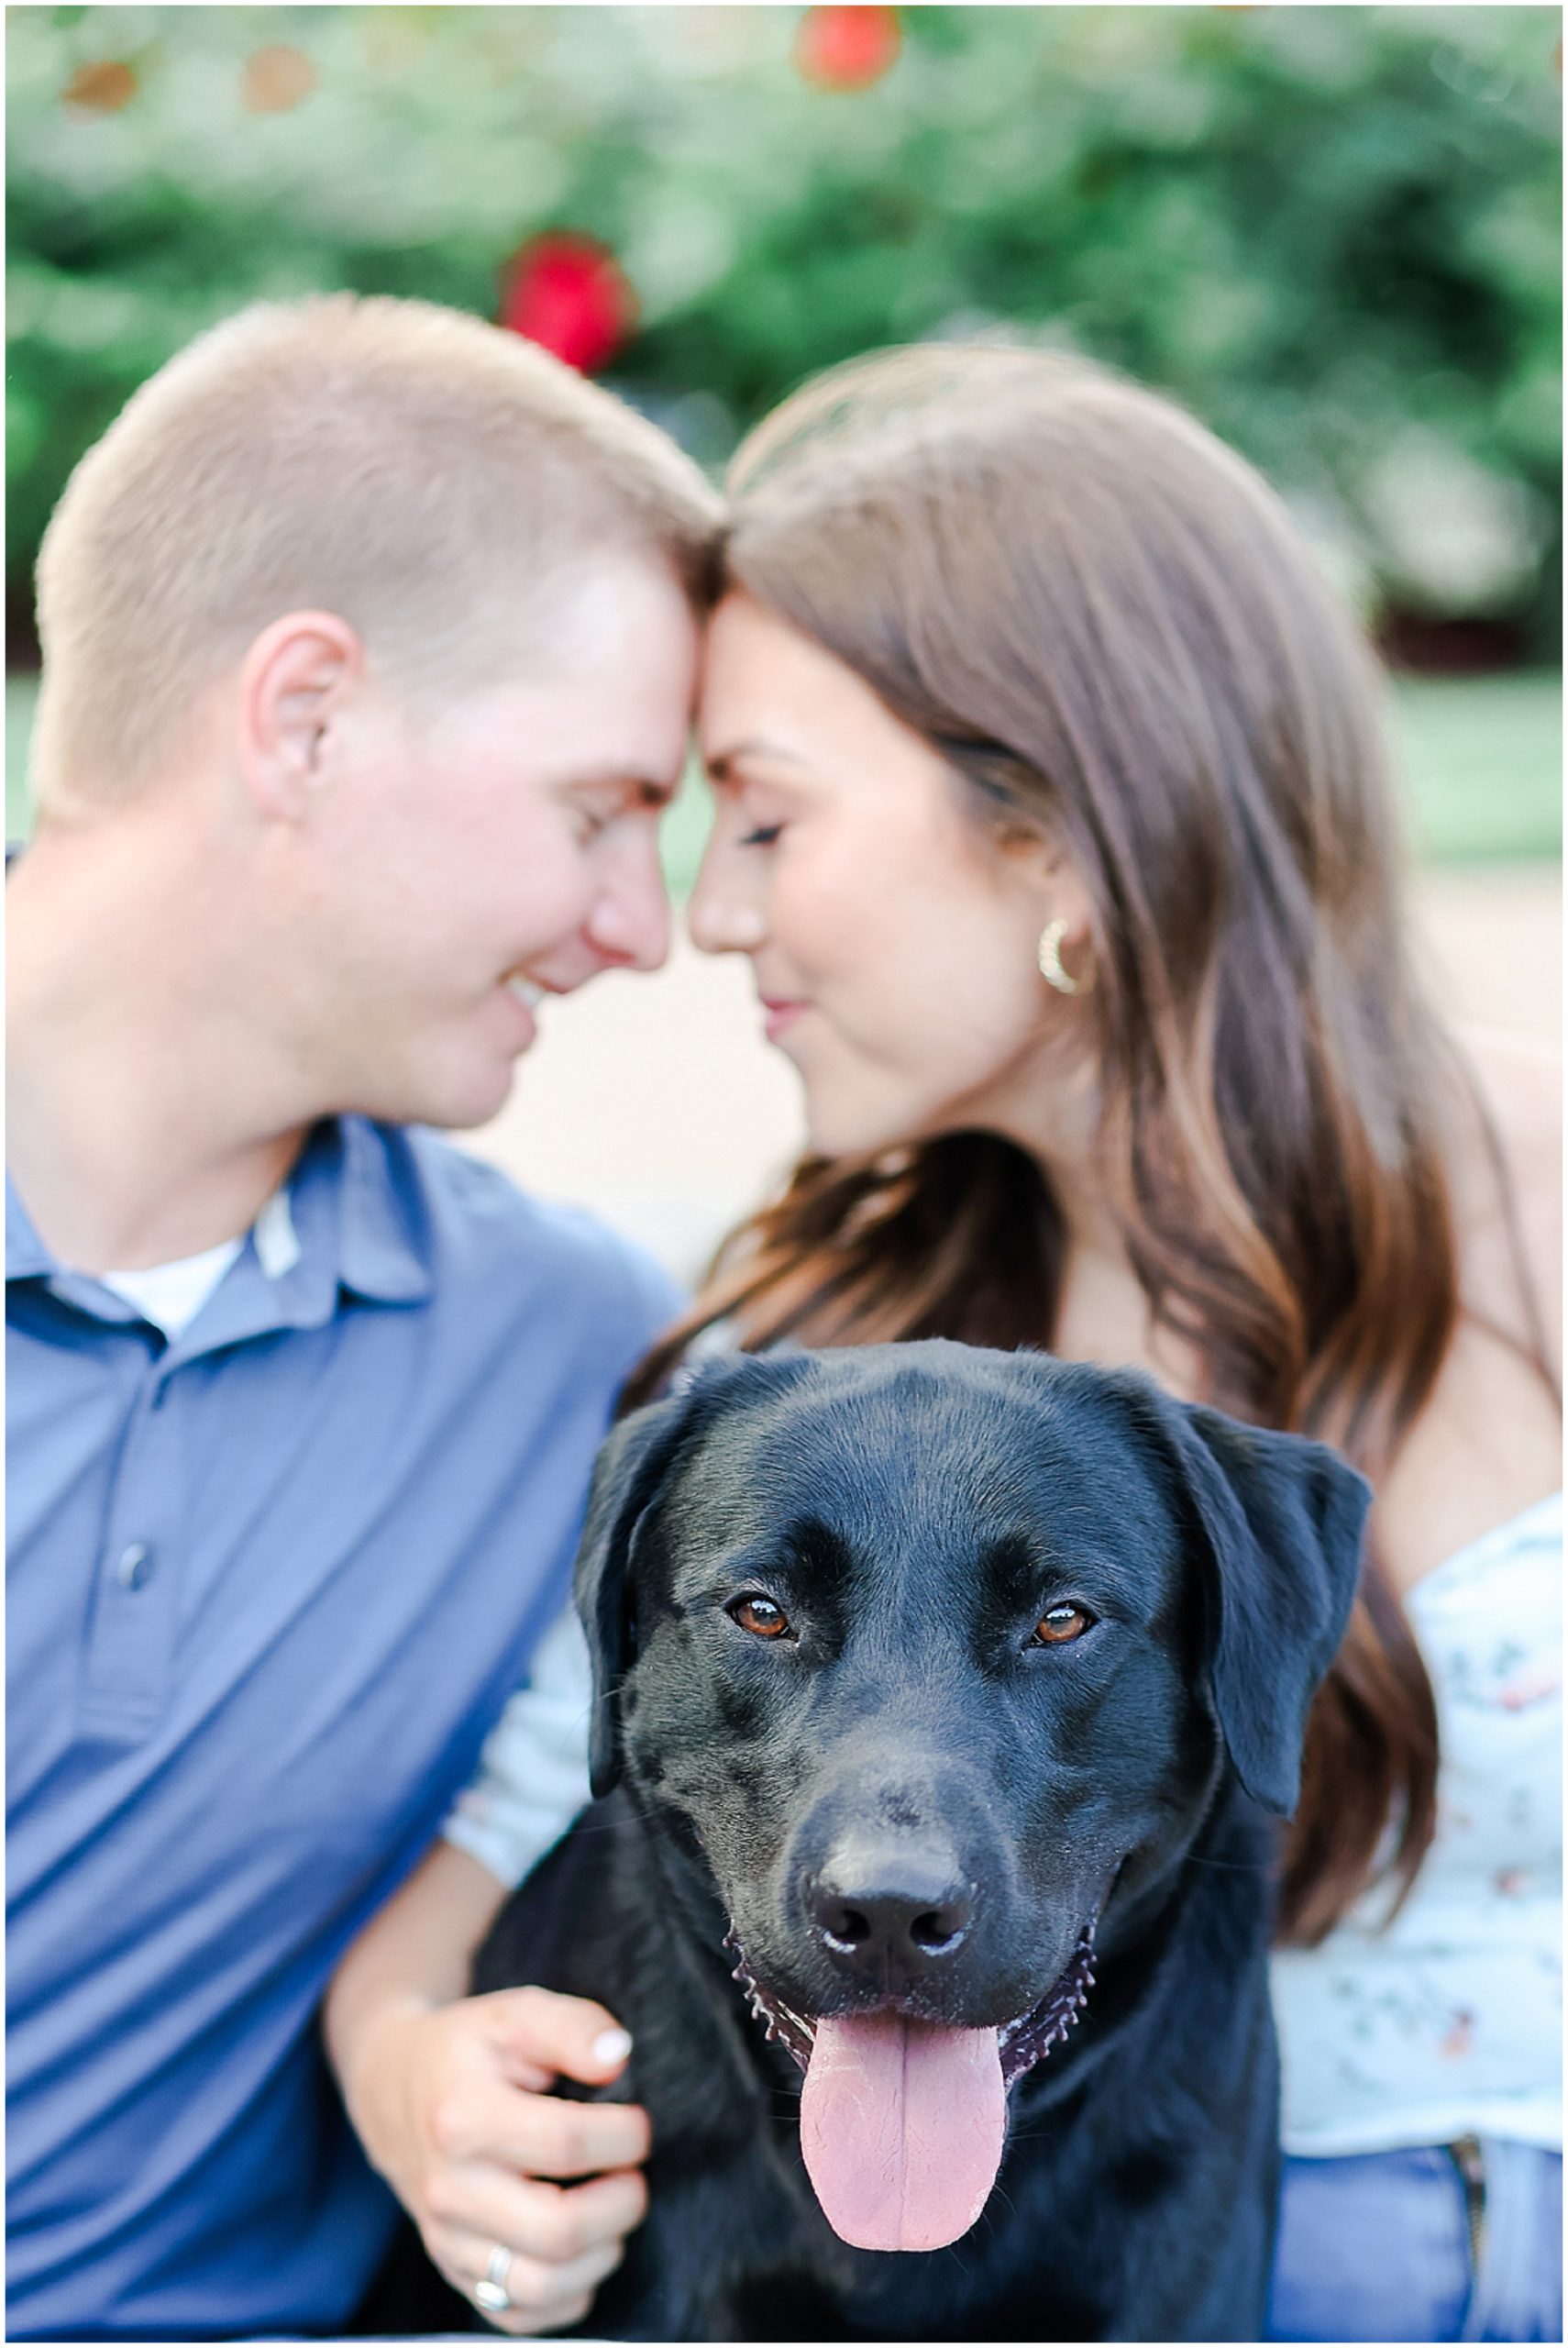 Where to take photos in Kansas City - Wedding and Engagement Photos Overland Park Kansas - Mariam Saifan Photography - Loose Park - Light and Airy Wedding Photographer - dog with engagement photos - puppy